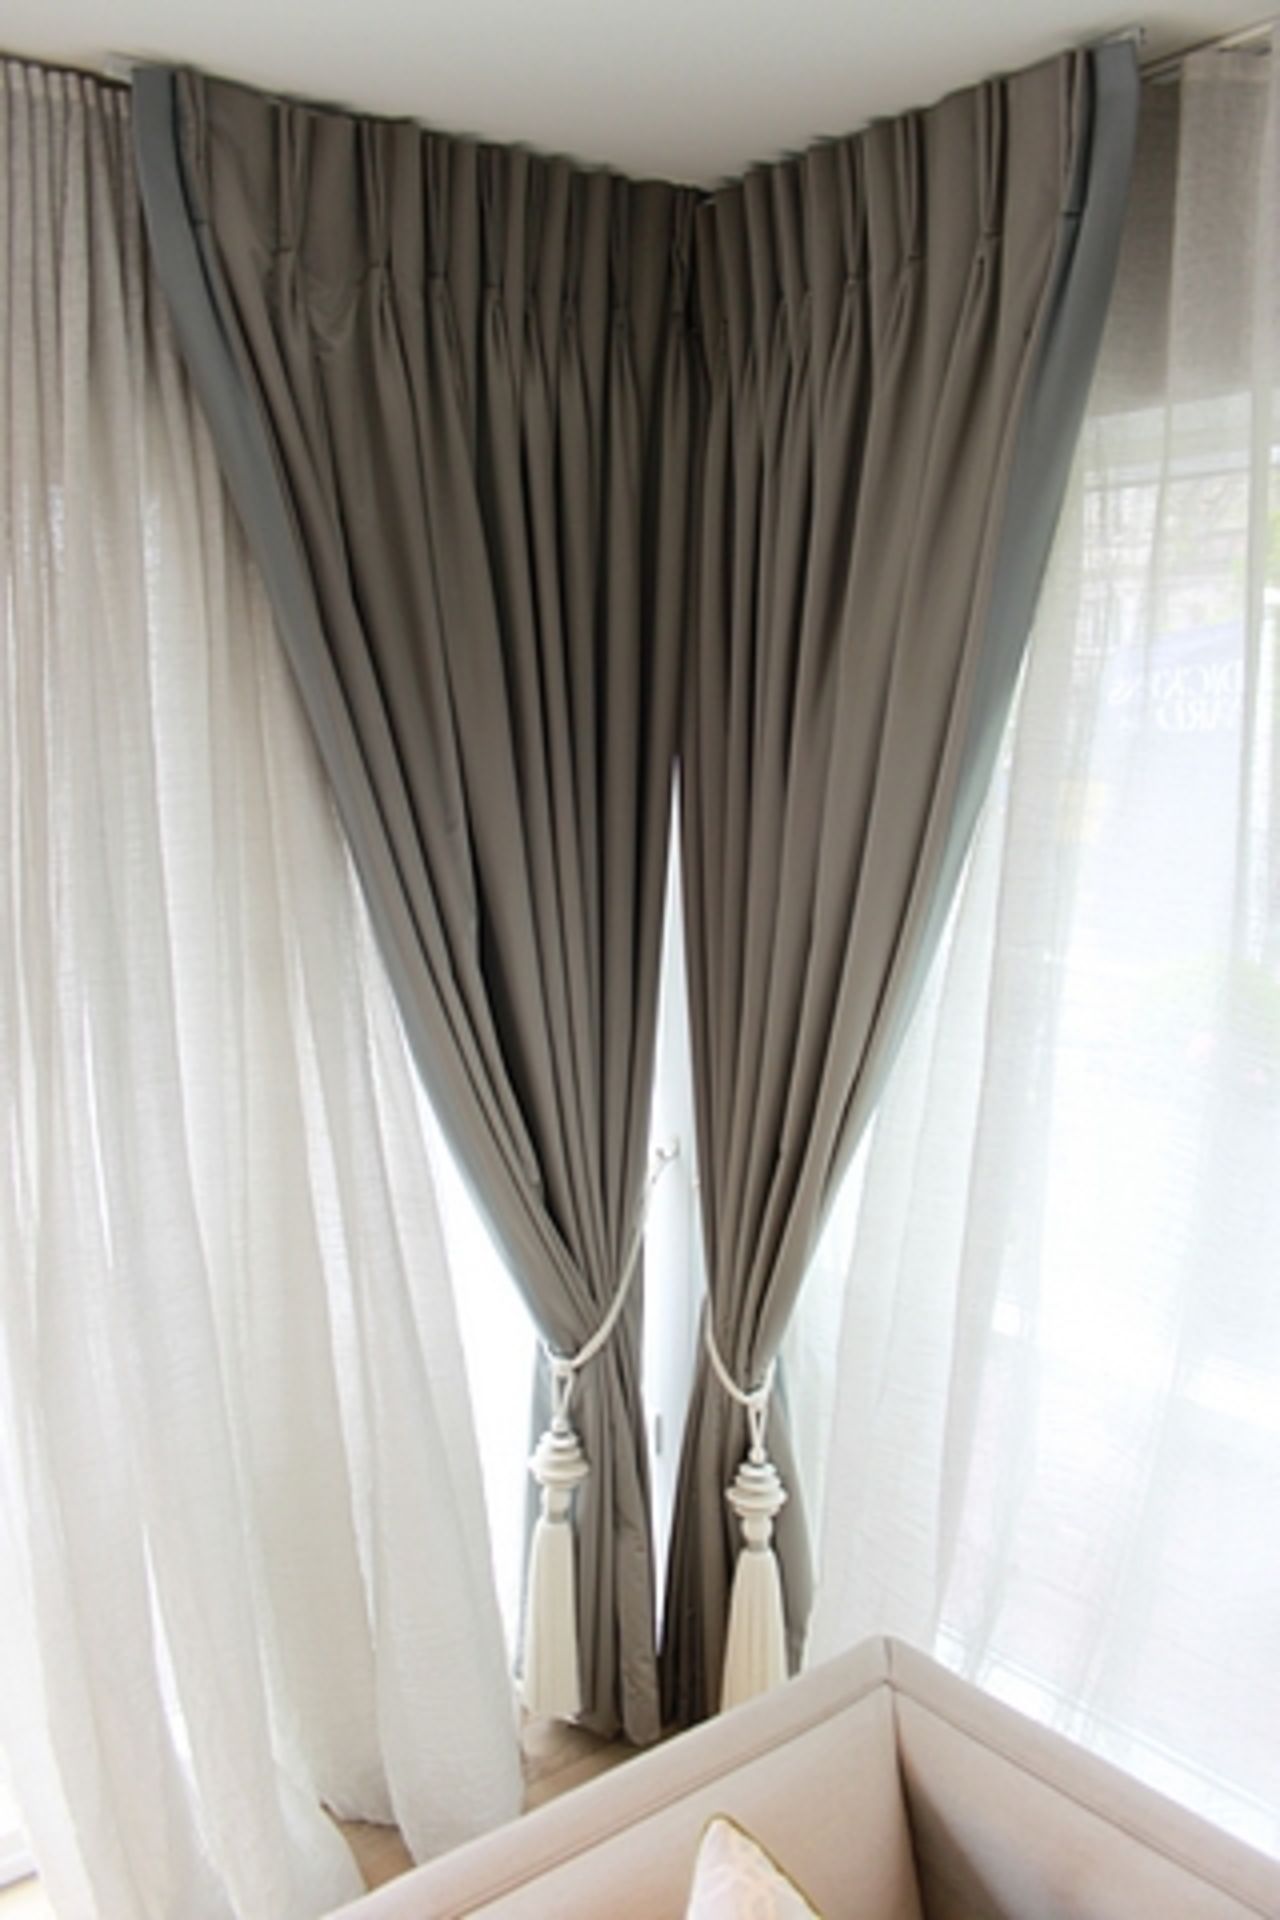 Drapes and voile panel spans 12m x 2600mm drop